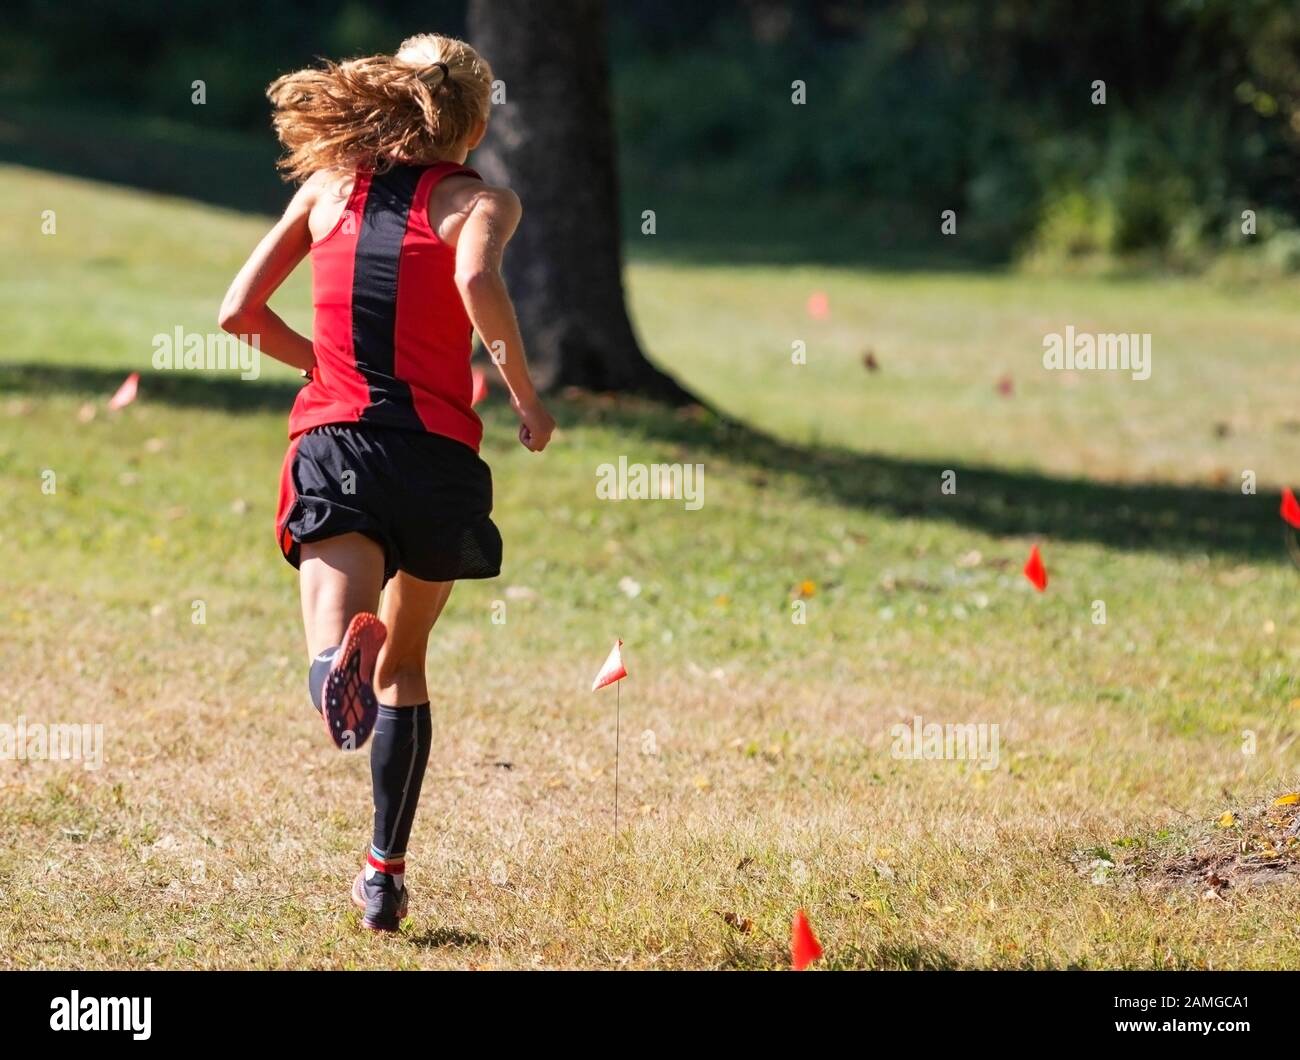 Rear view of a high school teenage girl running on a grass cross country course marked by small red flags. Stock Photo